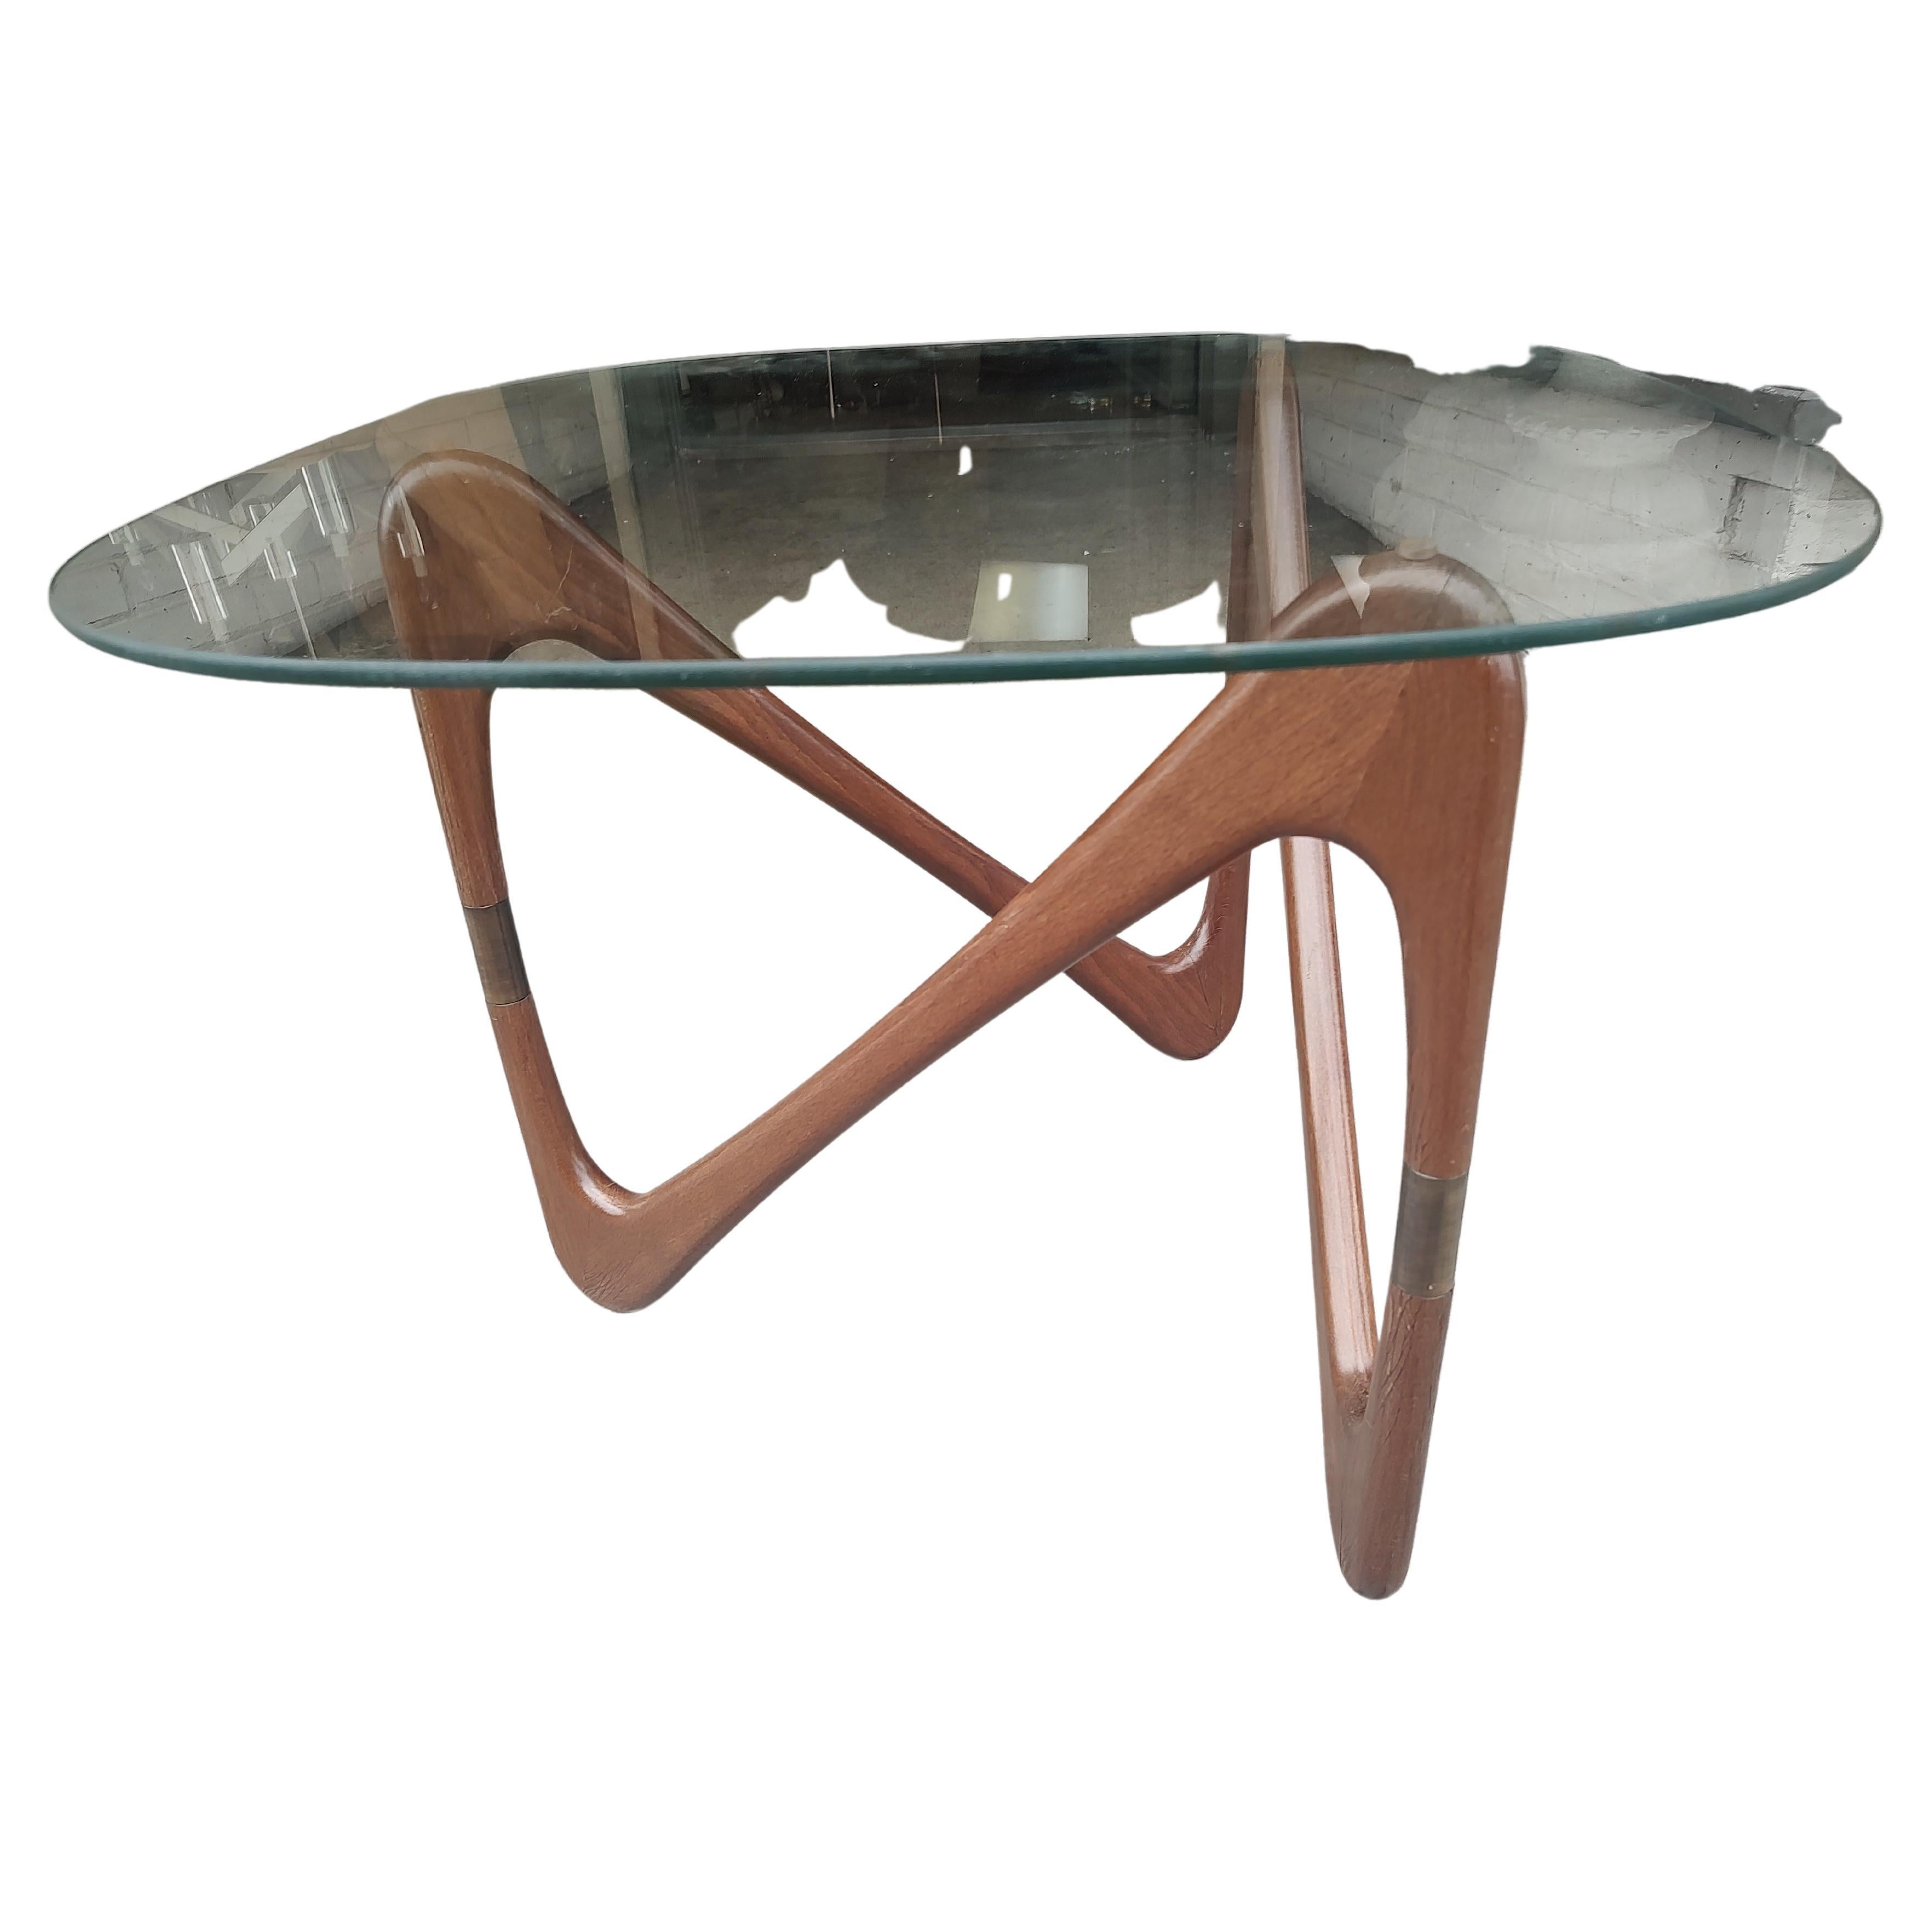 American Mid Century Modern Sculptural Walnut End Table Style of Adrian Pearsall C1970 For Sale